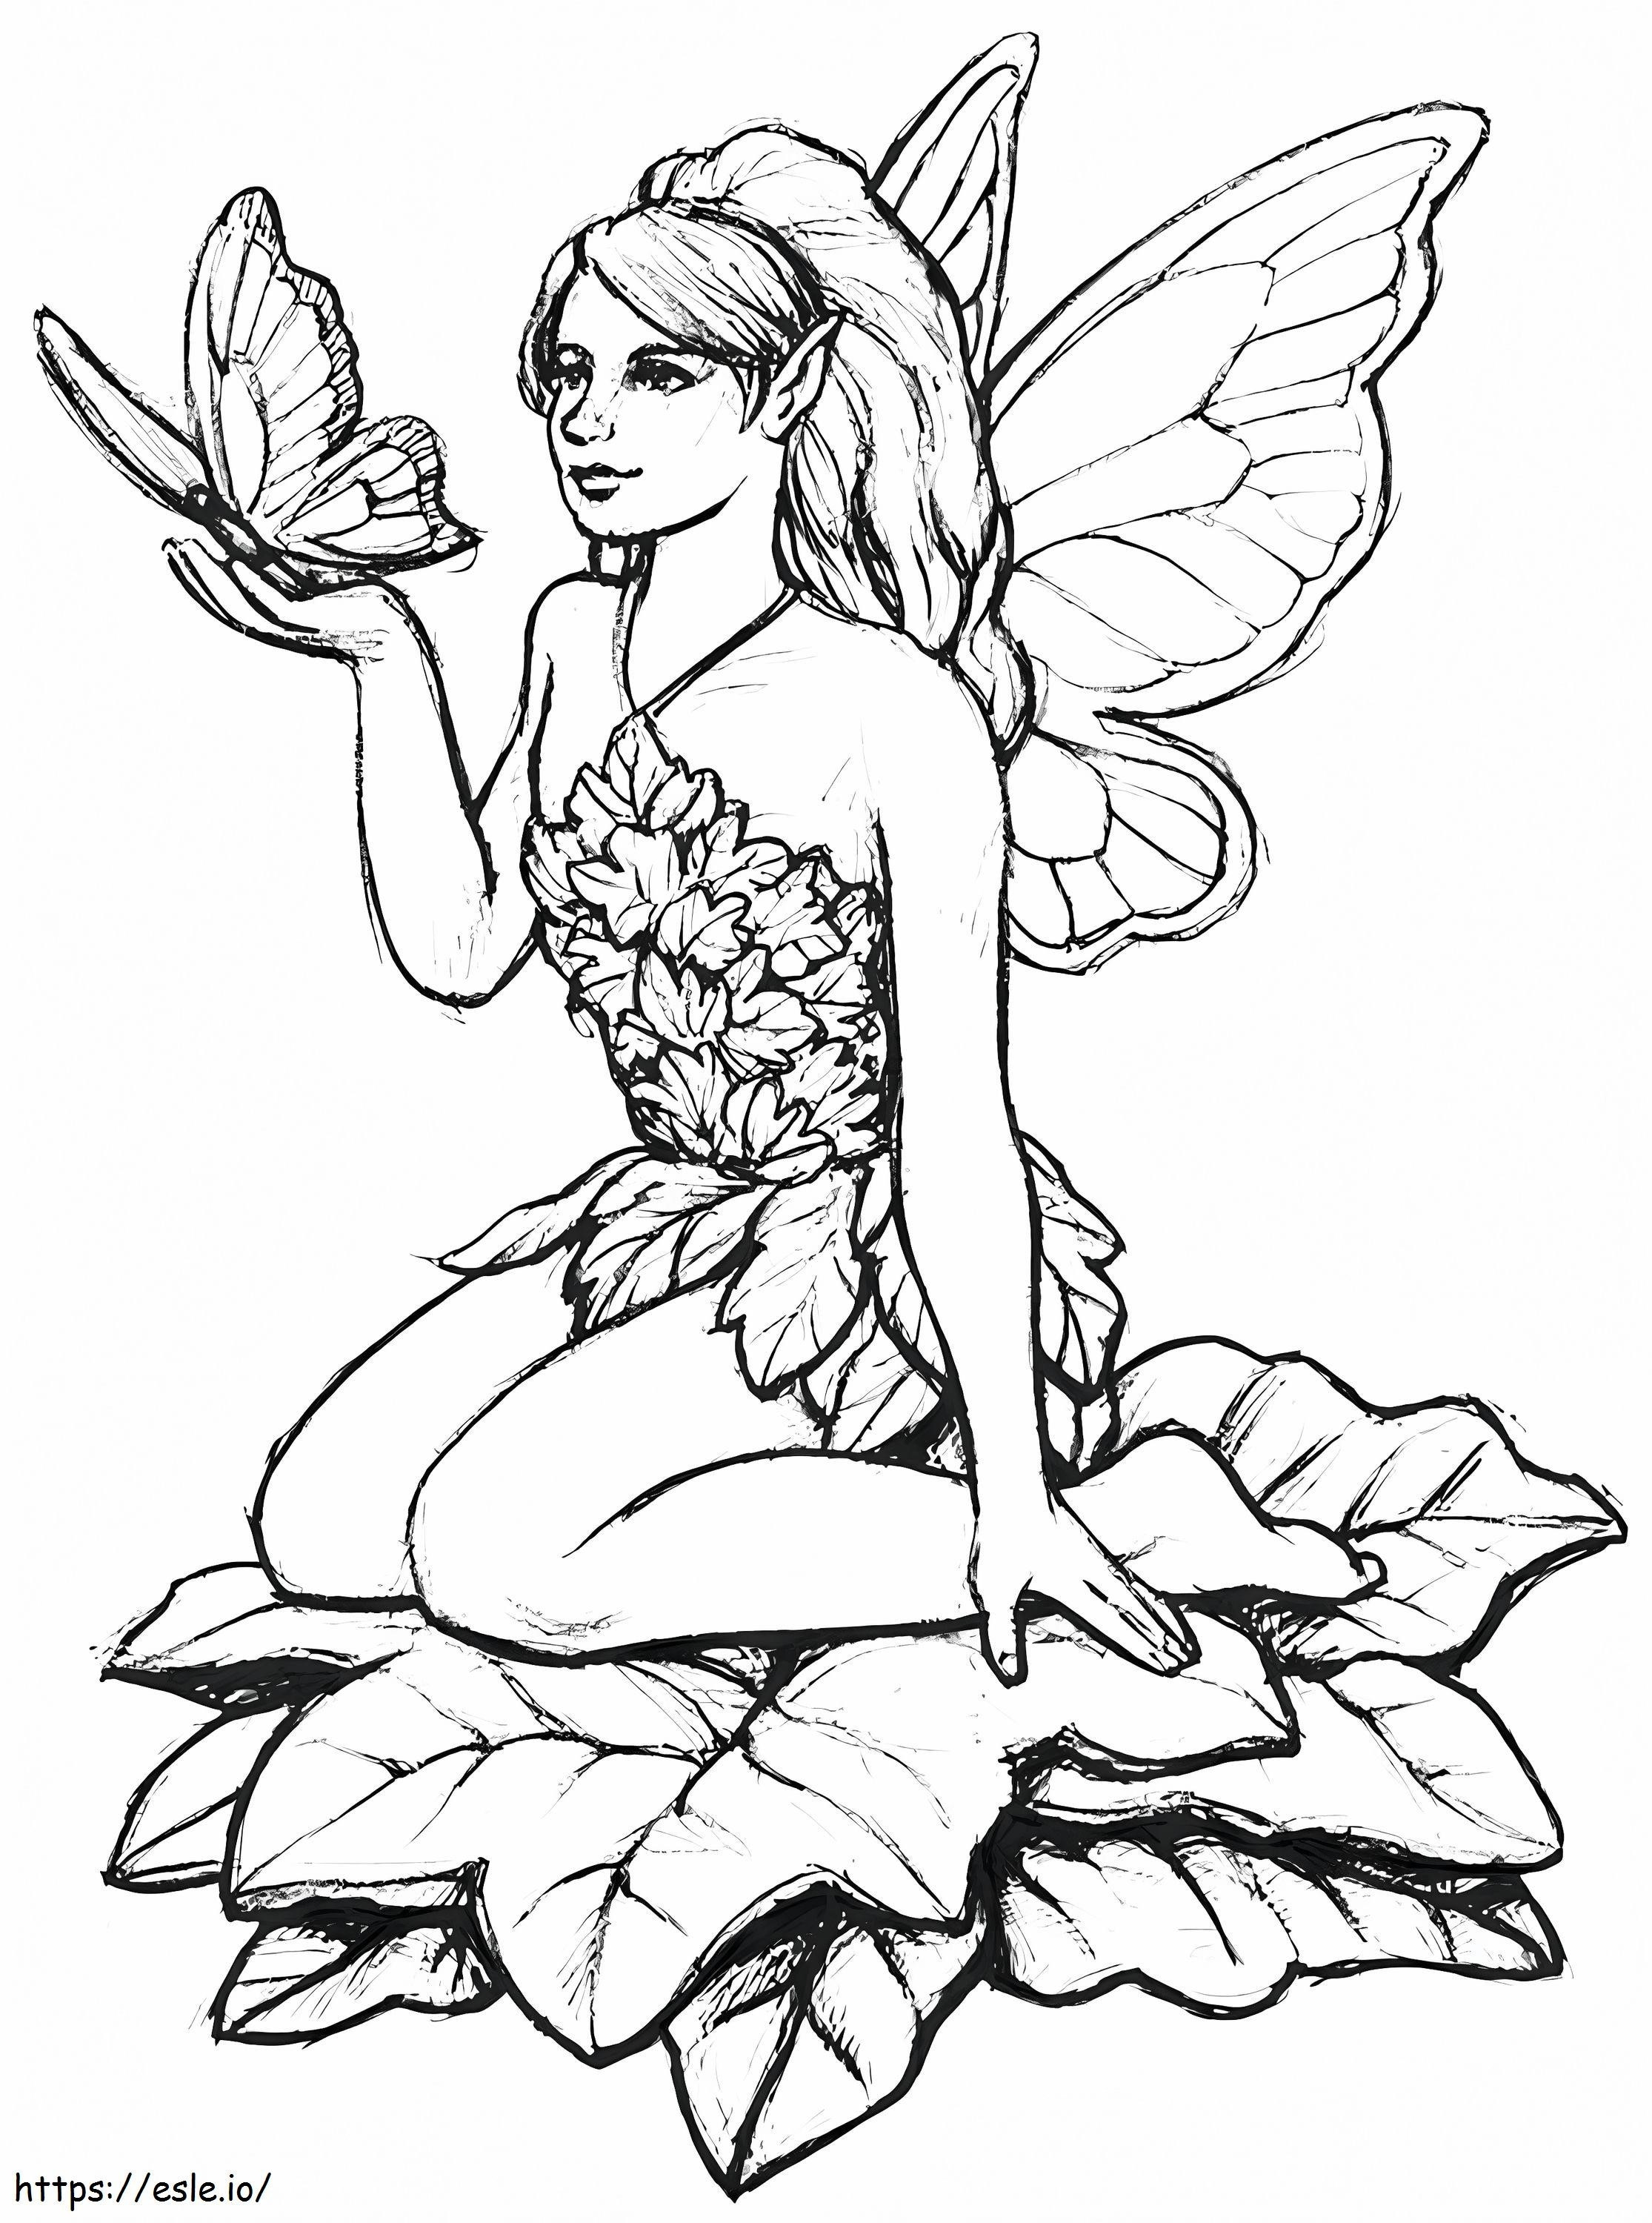 Untitled79987498797979798 coloring page